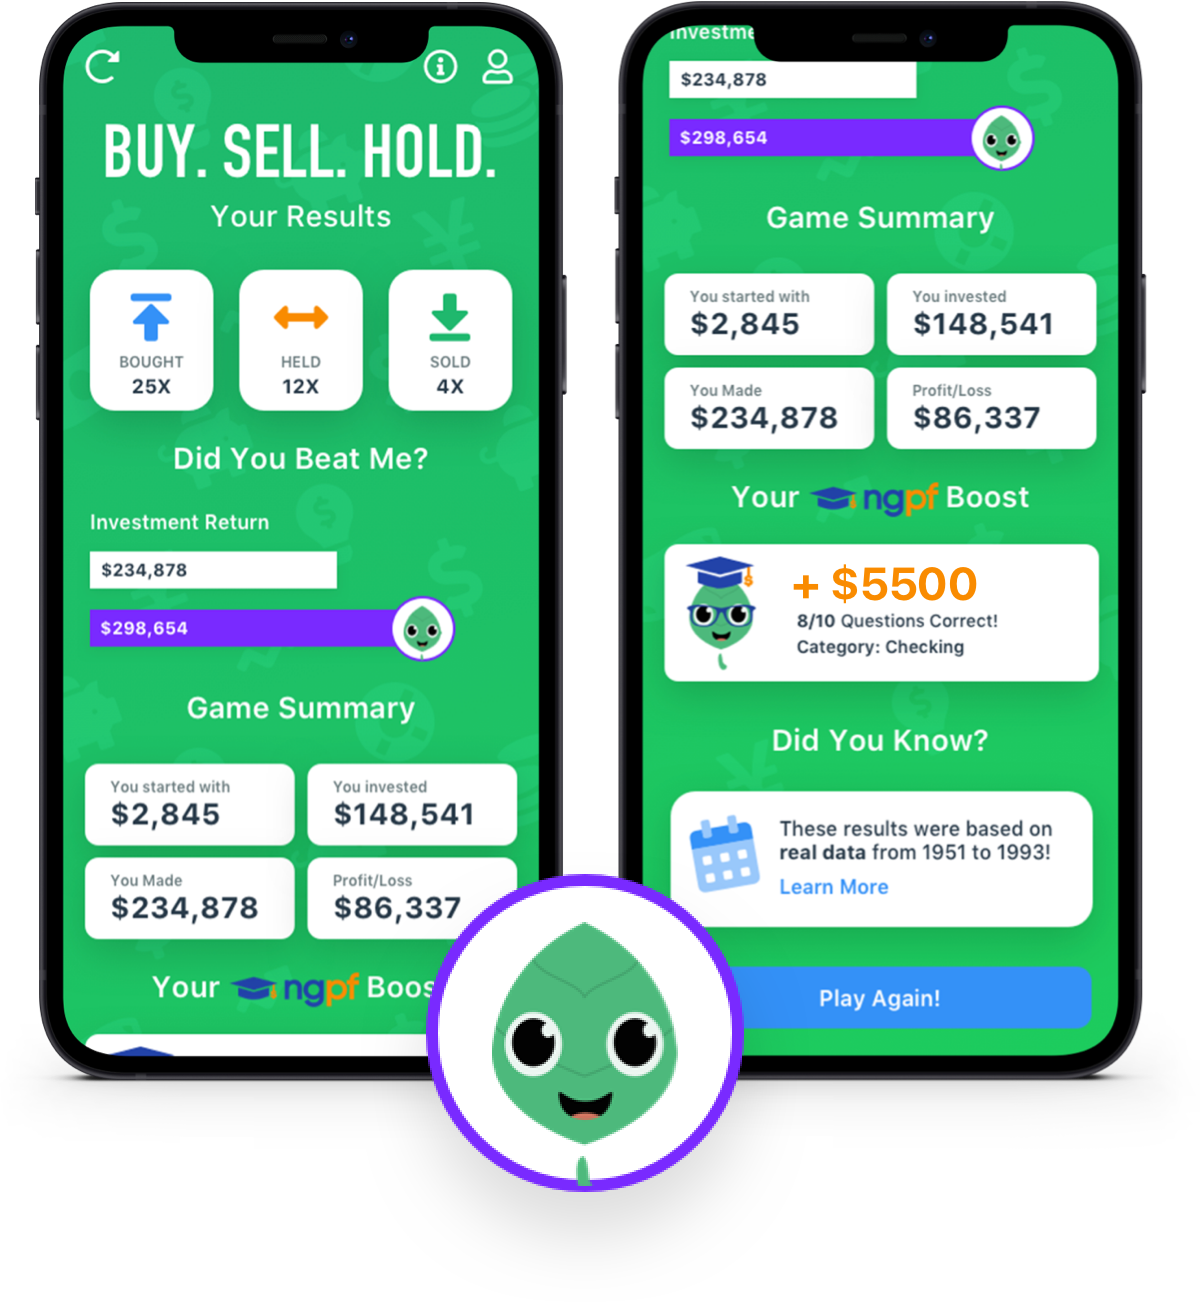 Buy Sell Hold, Educational S&P 500 Learning Game - Financial Literacy Mobile App